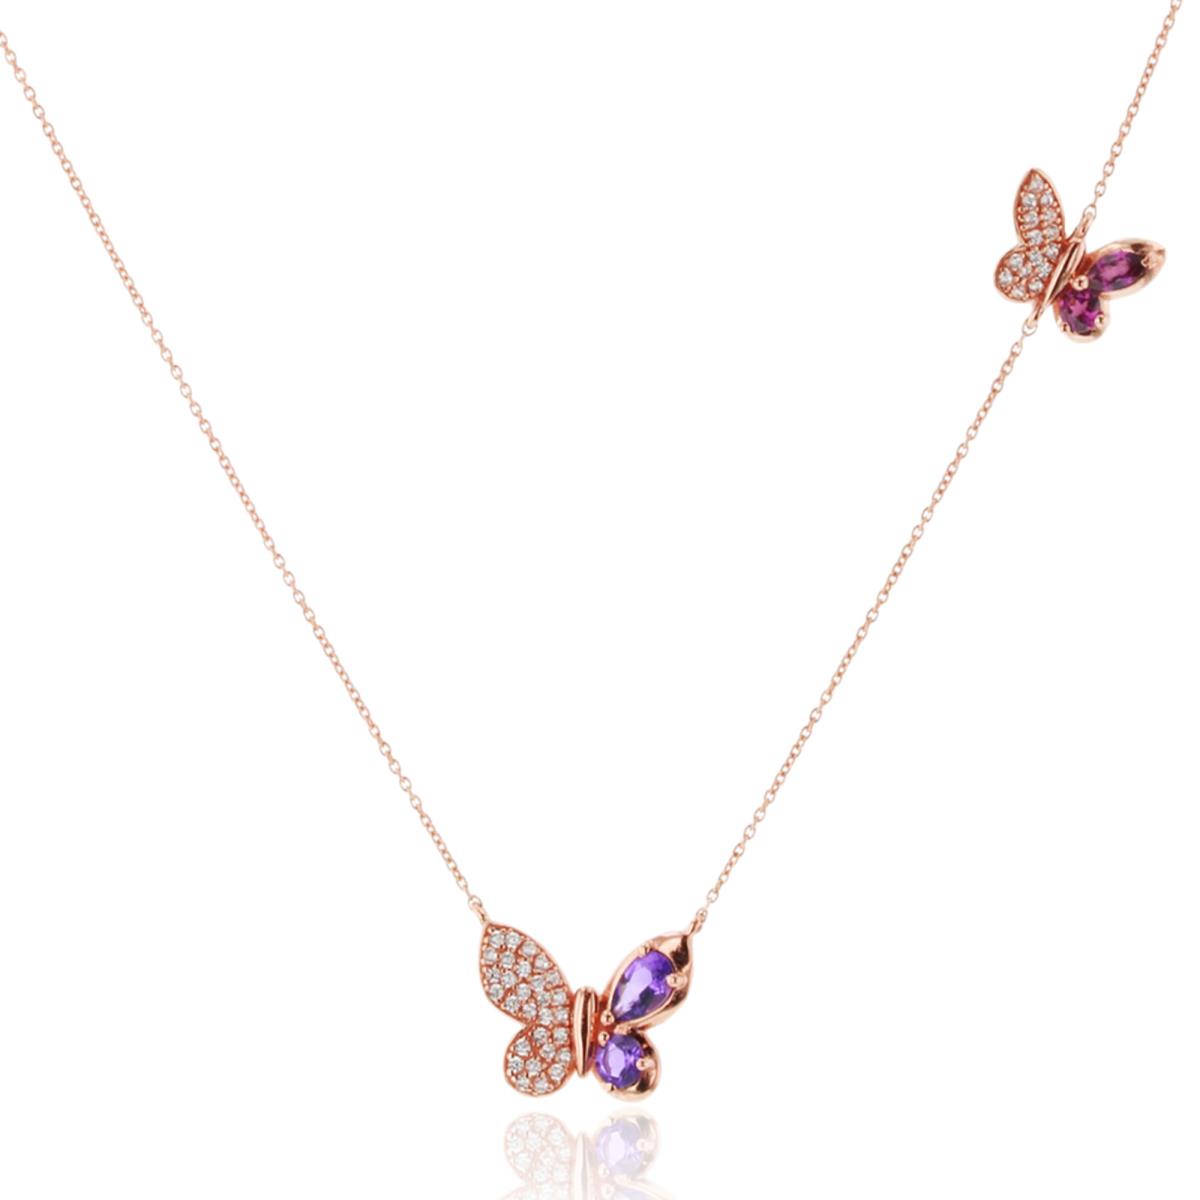 14K  Rose Gold 0.132cttw Rnd Diamonds & Rnd Amethyst/ PS and MQ Rhodolite Double Butterfly 18"Necklace